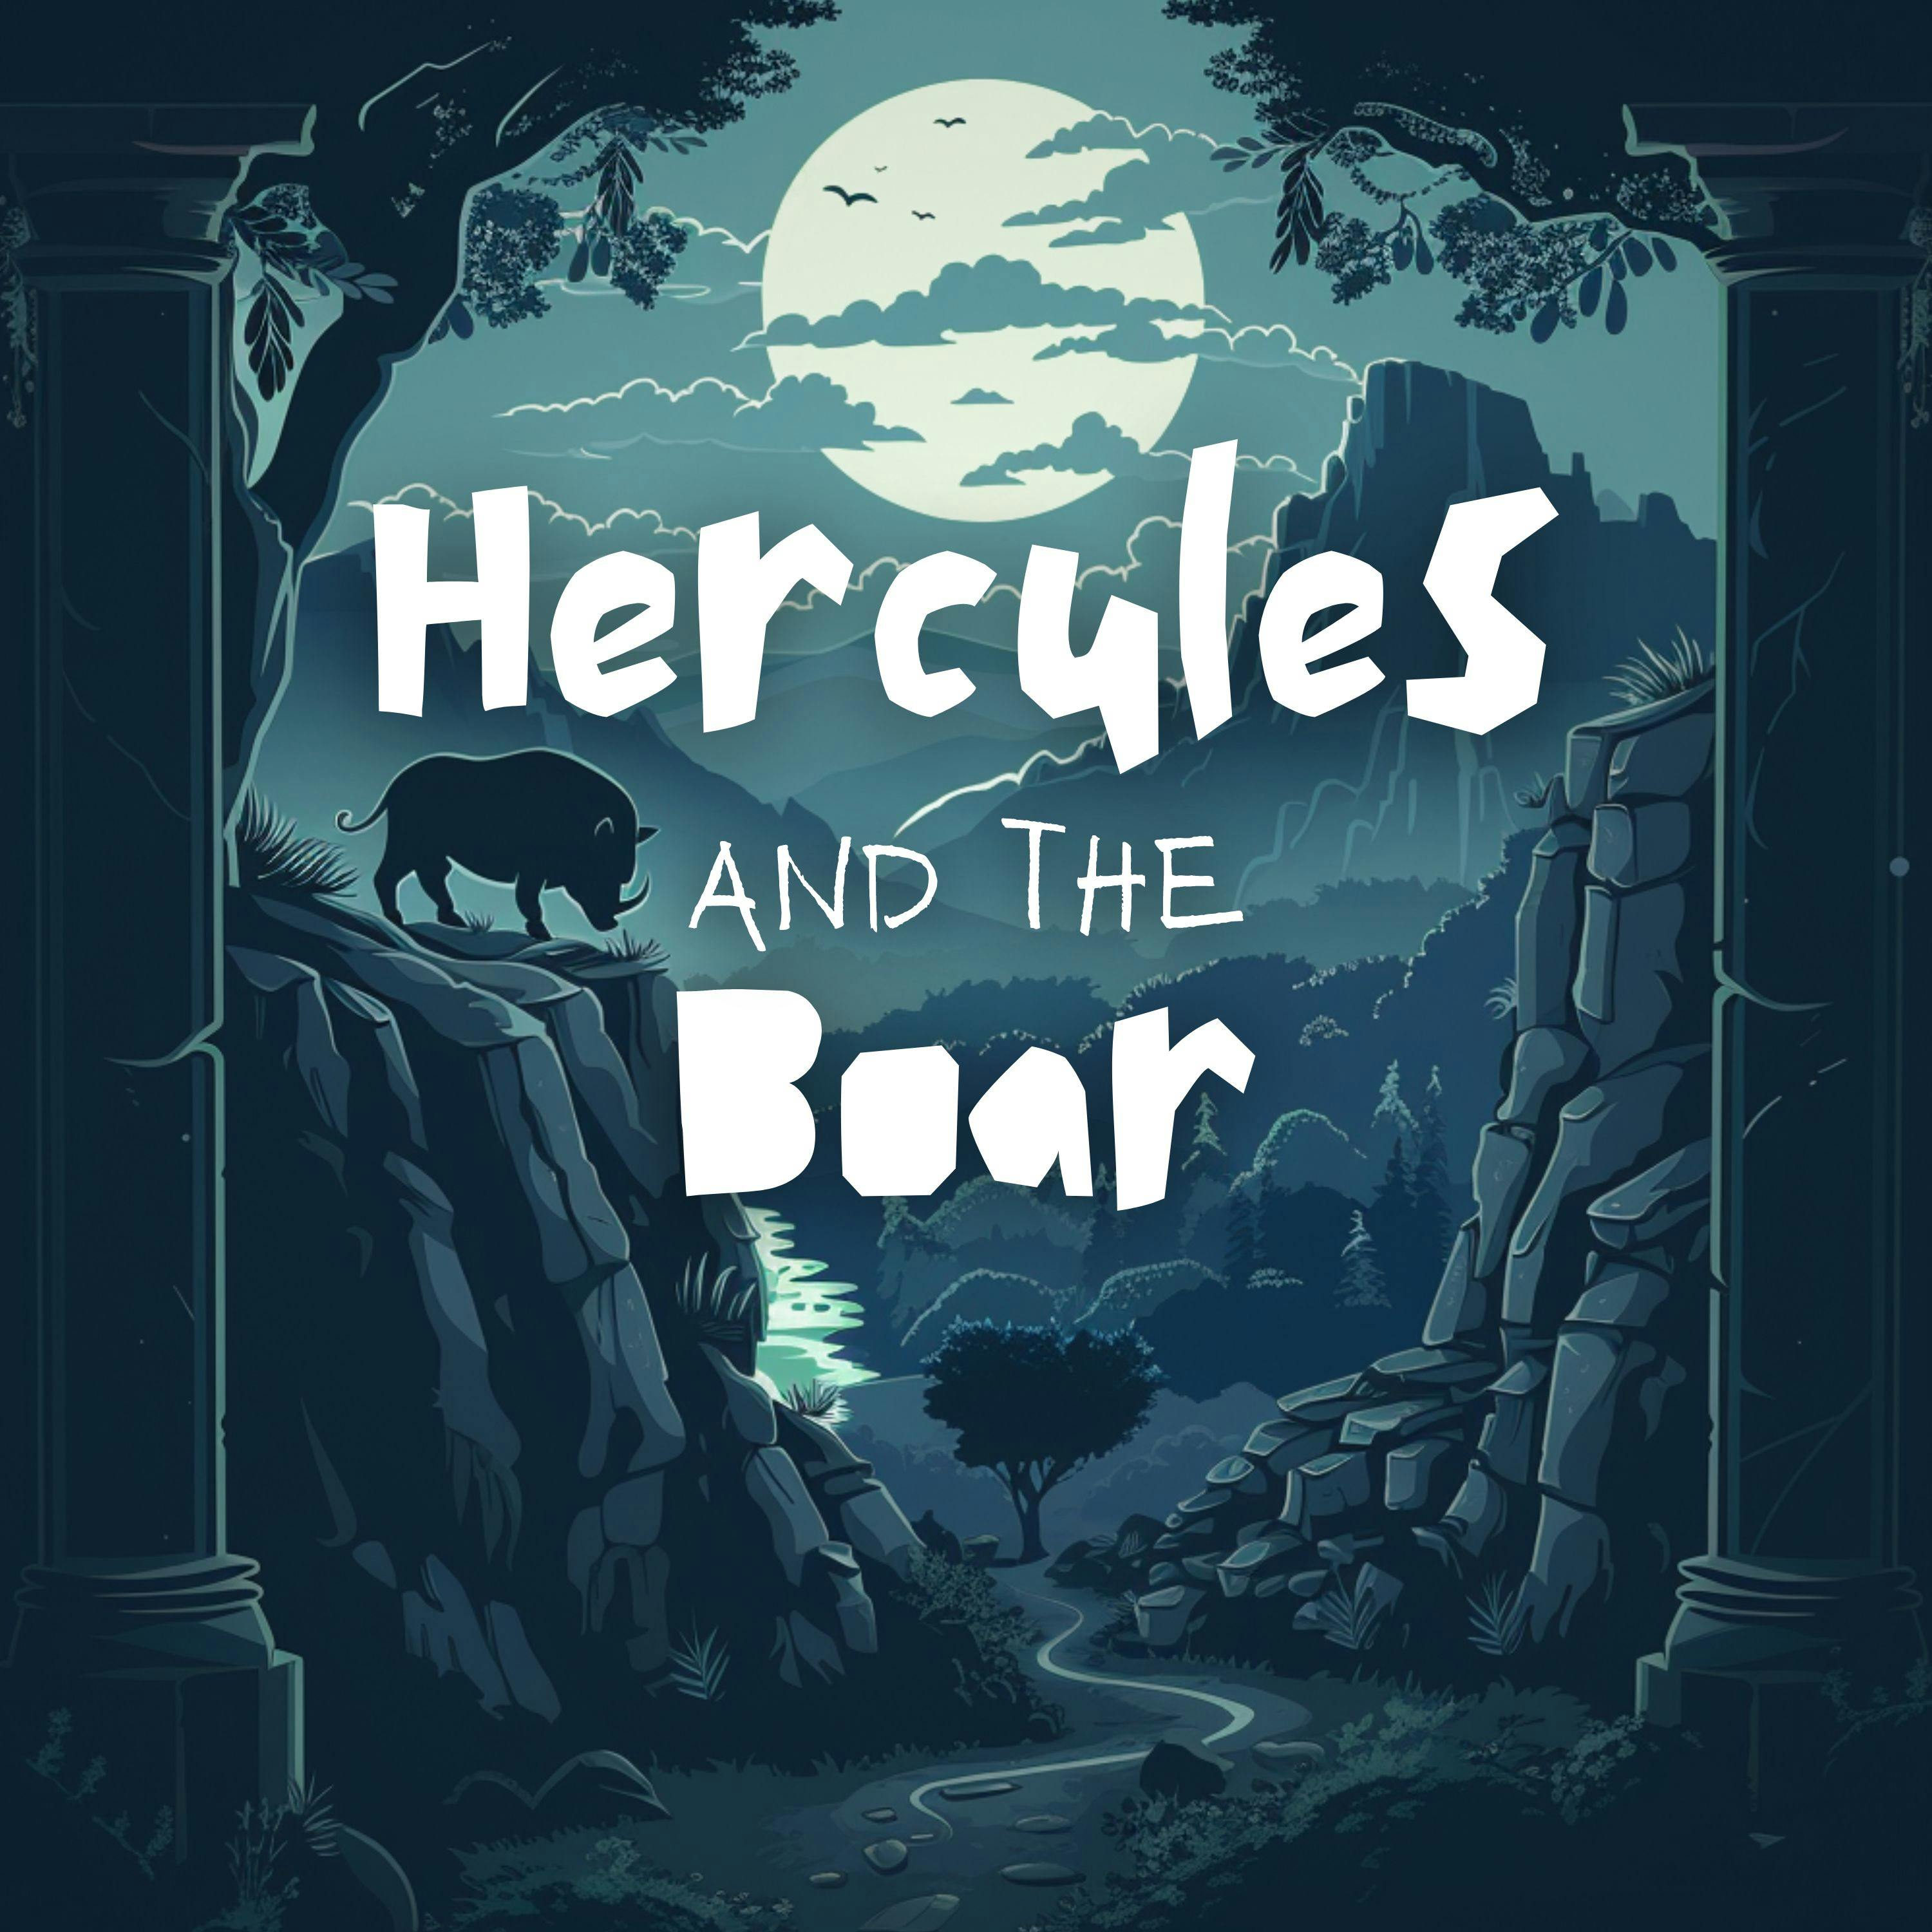 Hercules and the Boar